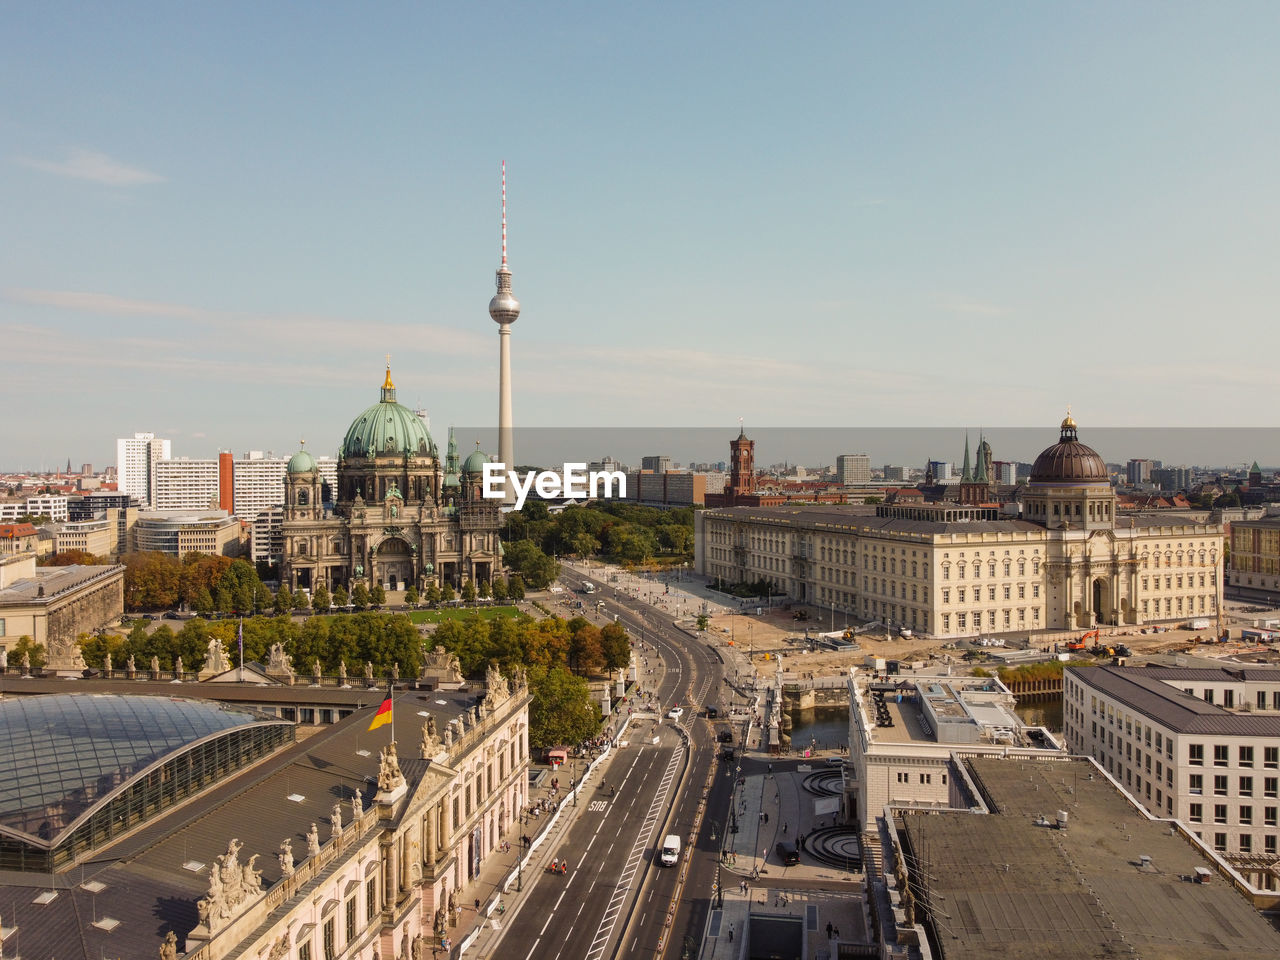 Berlin cityscape with berlin cathedral and television tower, germany